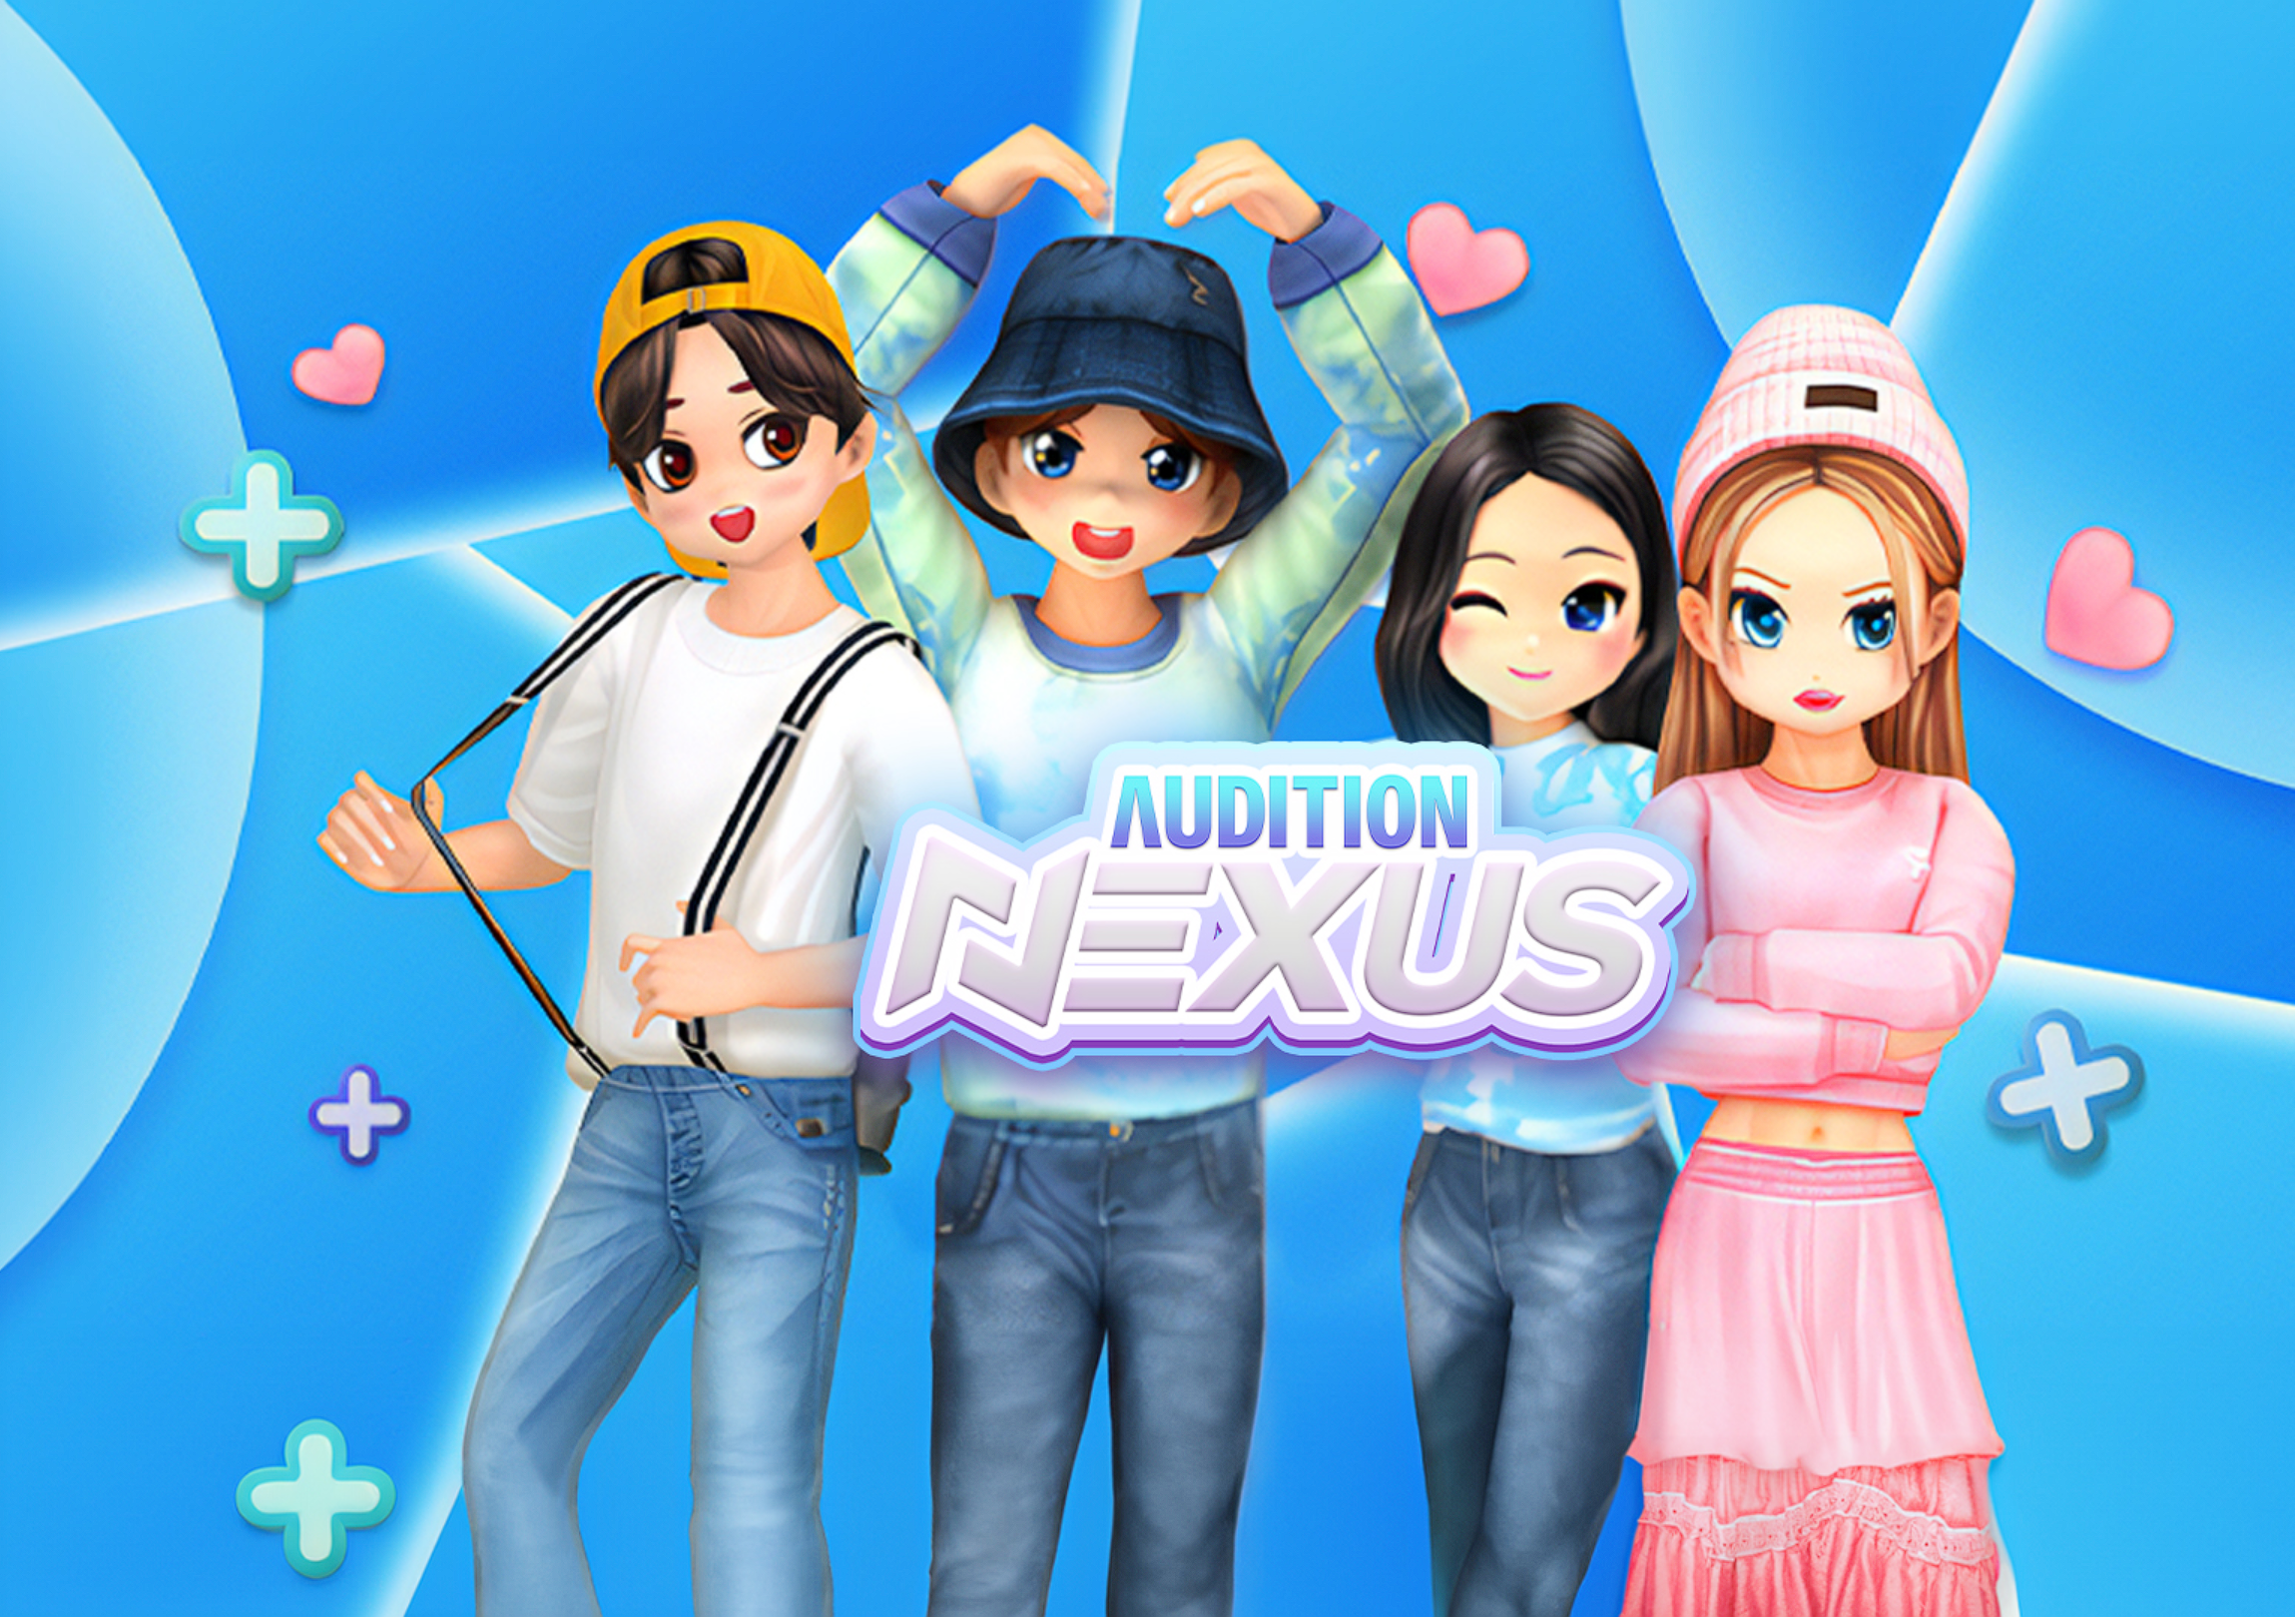 bannernx - [Audition Online] Audition Nexus | MMO Dancing Rhythm Game | All Game Features 100% | 2x EXP & Den | Story Mode EP1,2, & 3 | Daily Tournaments - RaGEZONE Forums